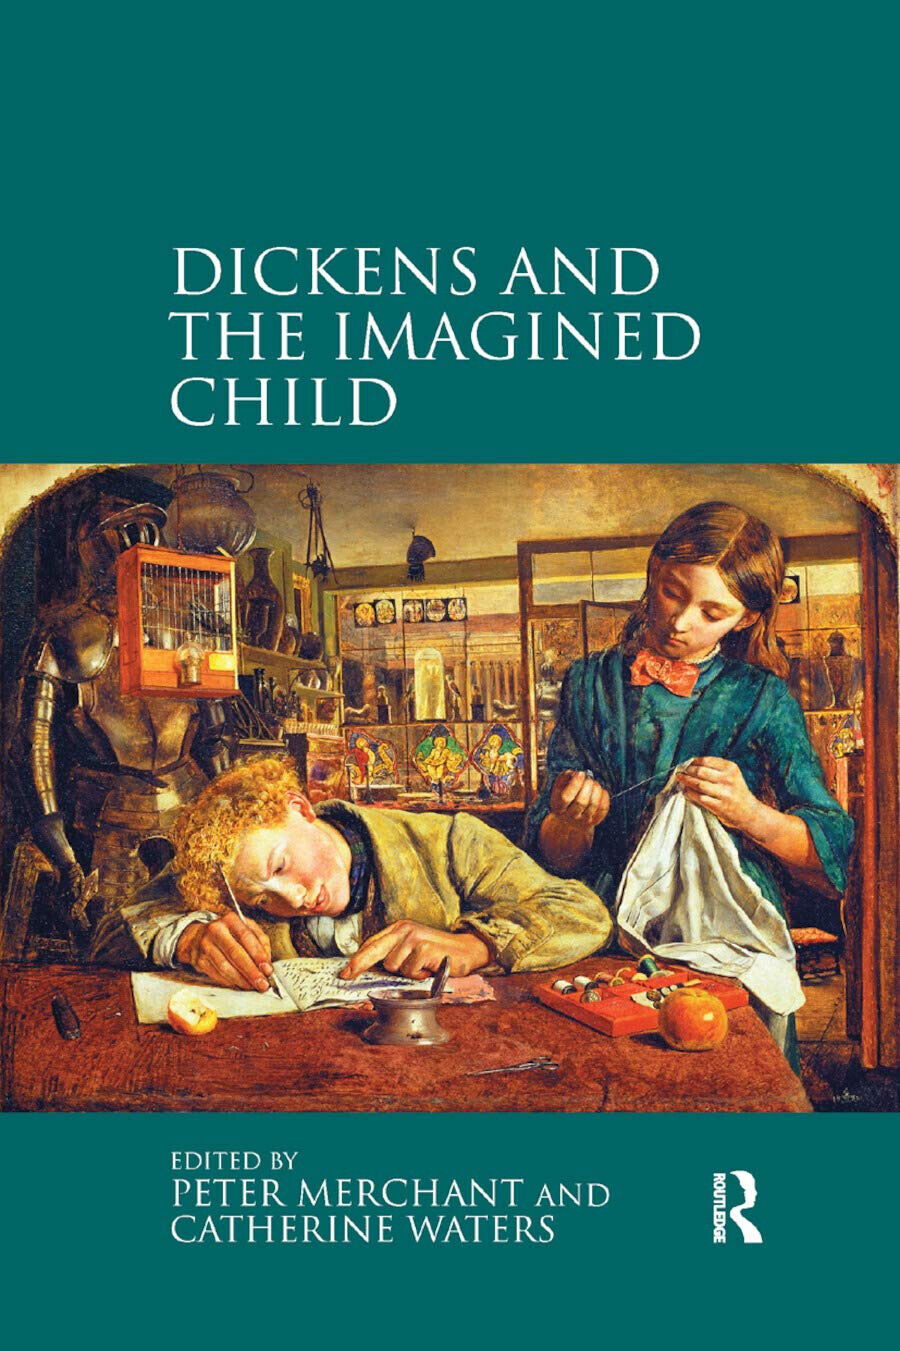 Dickens And The Imagined Child -Peter Merchant, Professor Catherine Waters- 2019